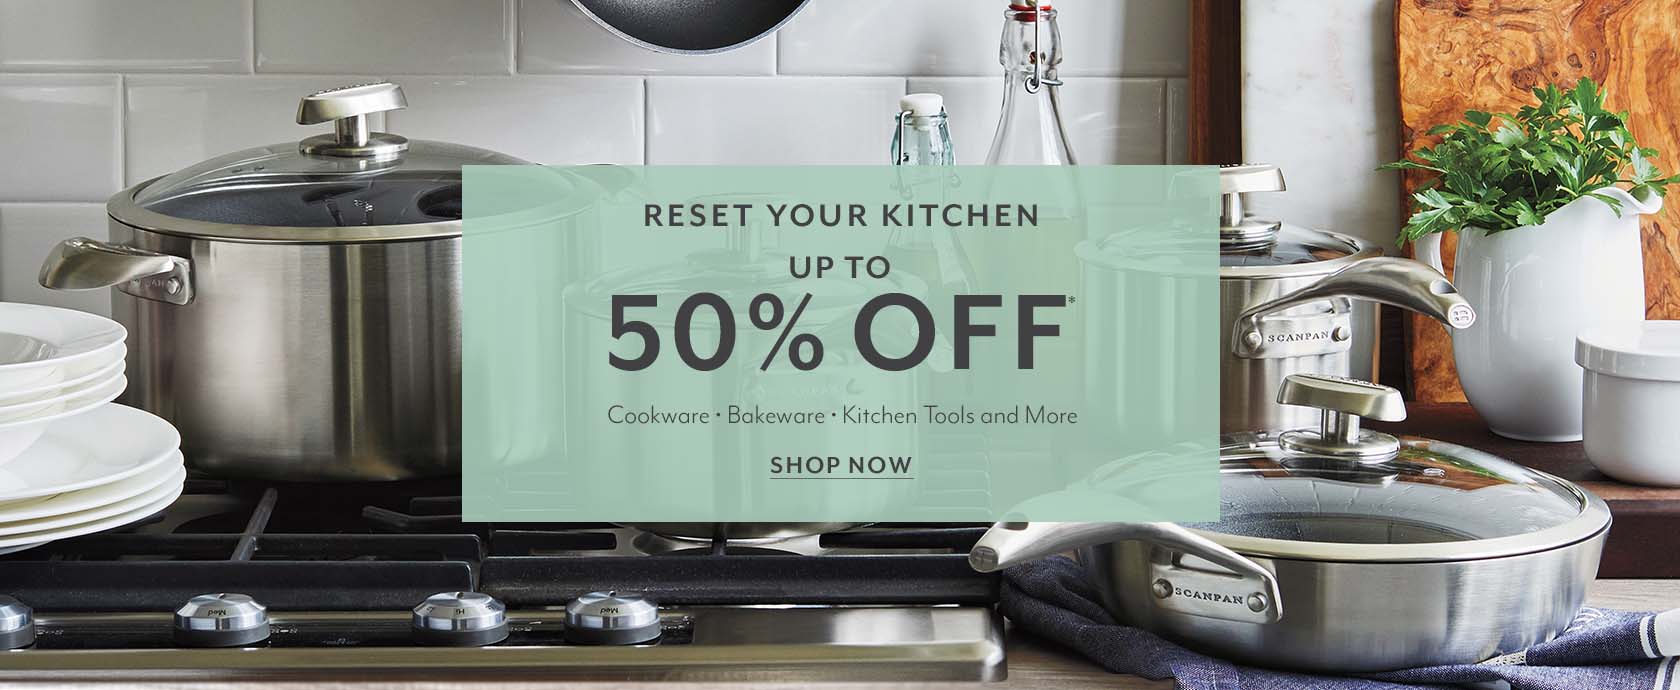 Reset your kitchen up to 50% off cookware, bakeware, kitchen tools and more. Shop Now. Nonstick cookware on cooktop.